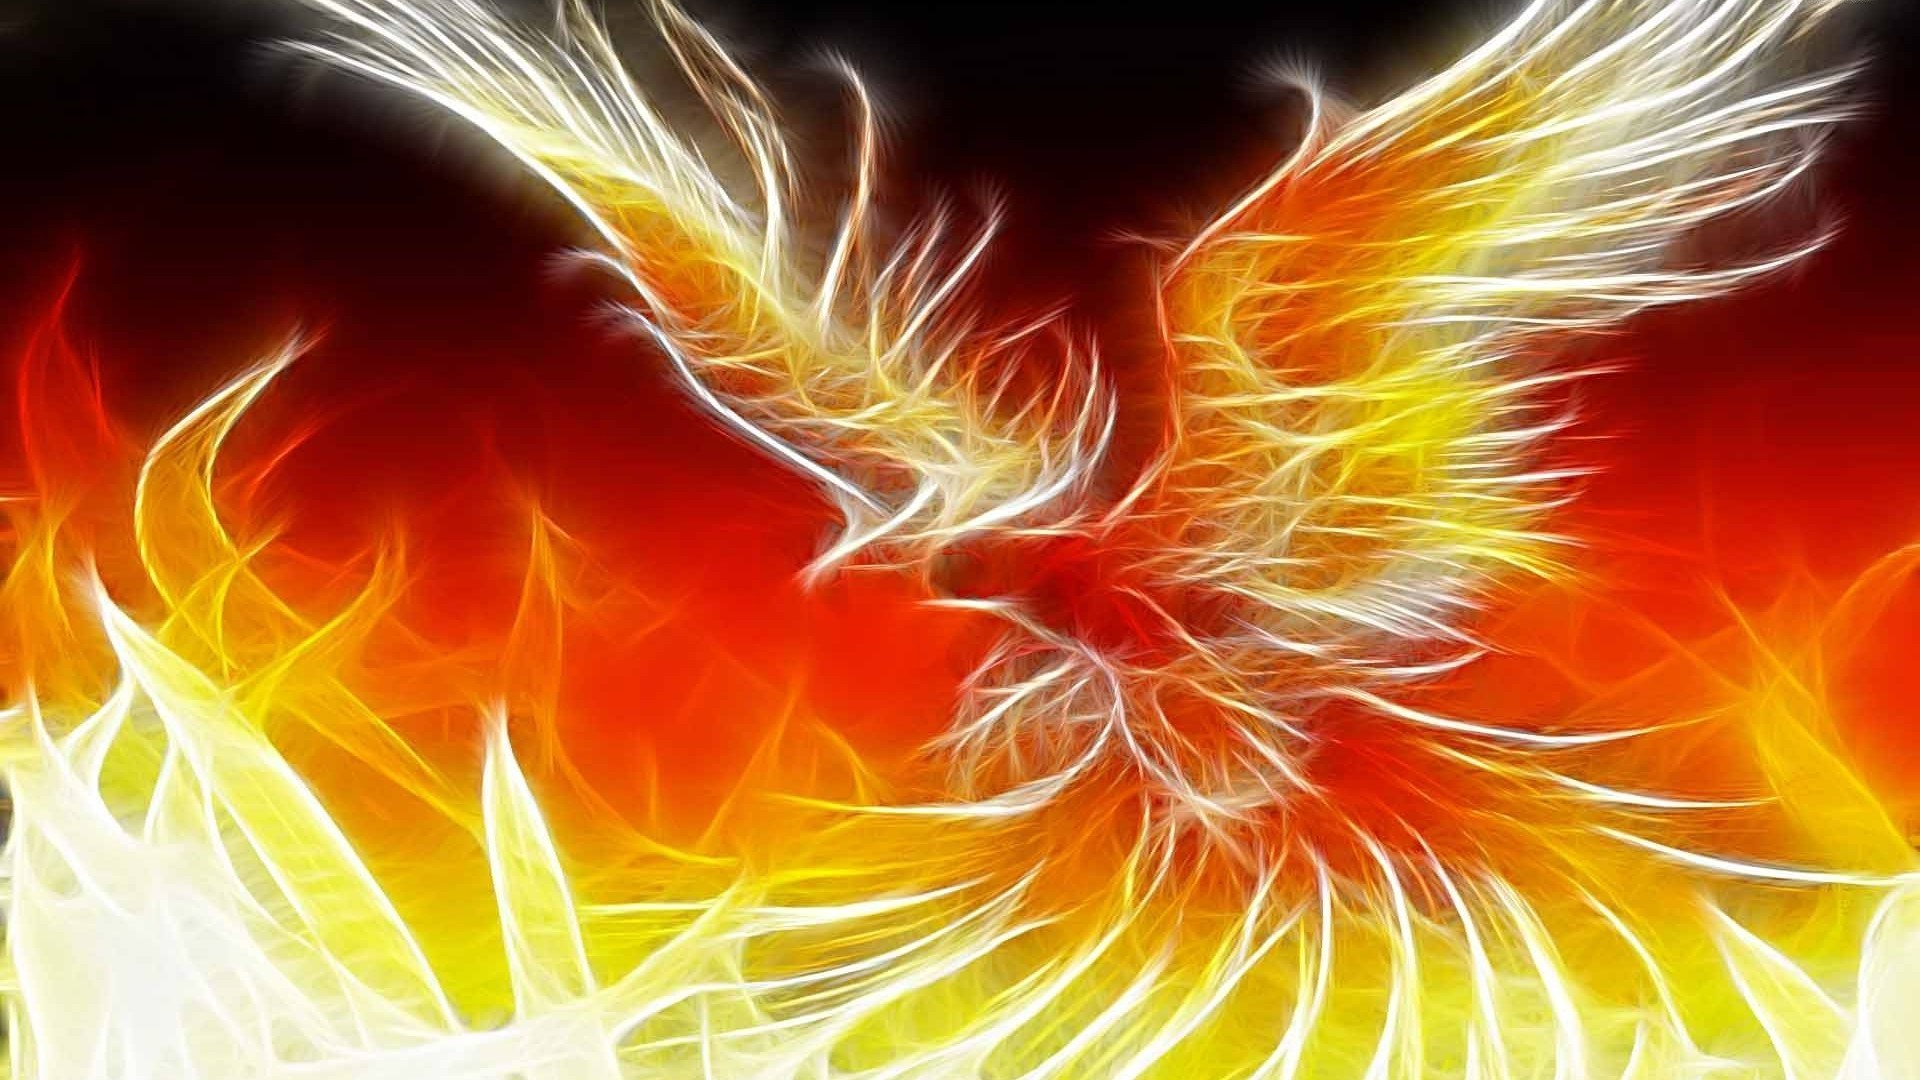 Wallpaper Phoenix with image resolution 1920x1080 pixel. You can use this wallpaper as background for your desktop Computer Screensavers, Android or iPhone smartphones